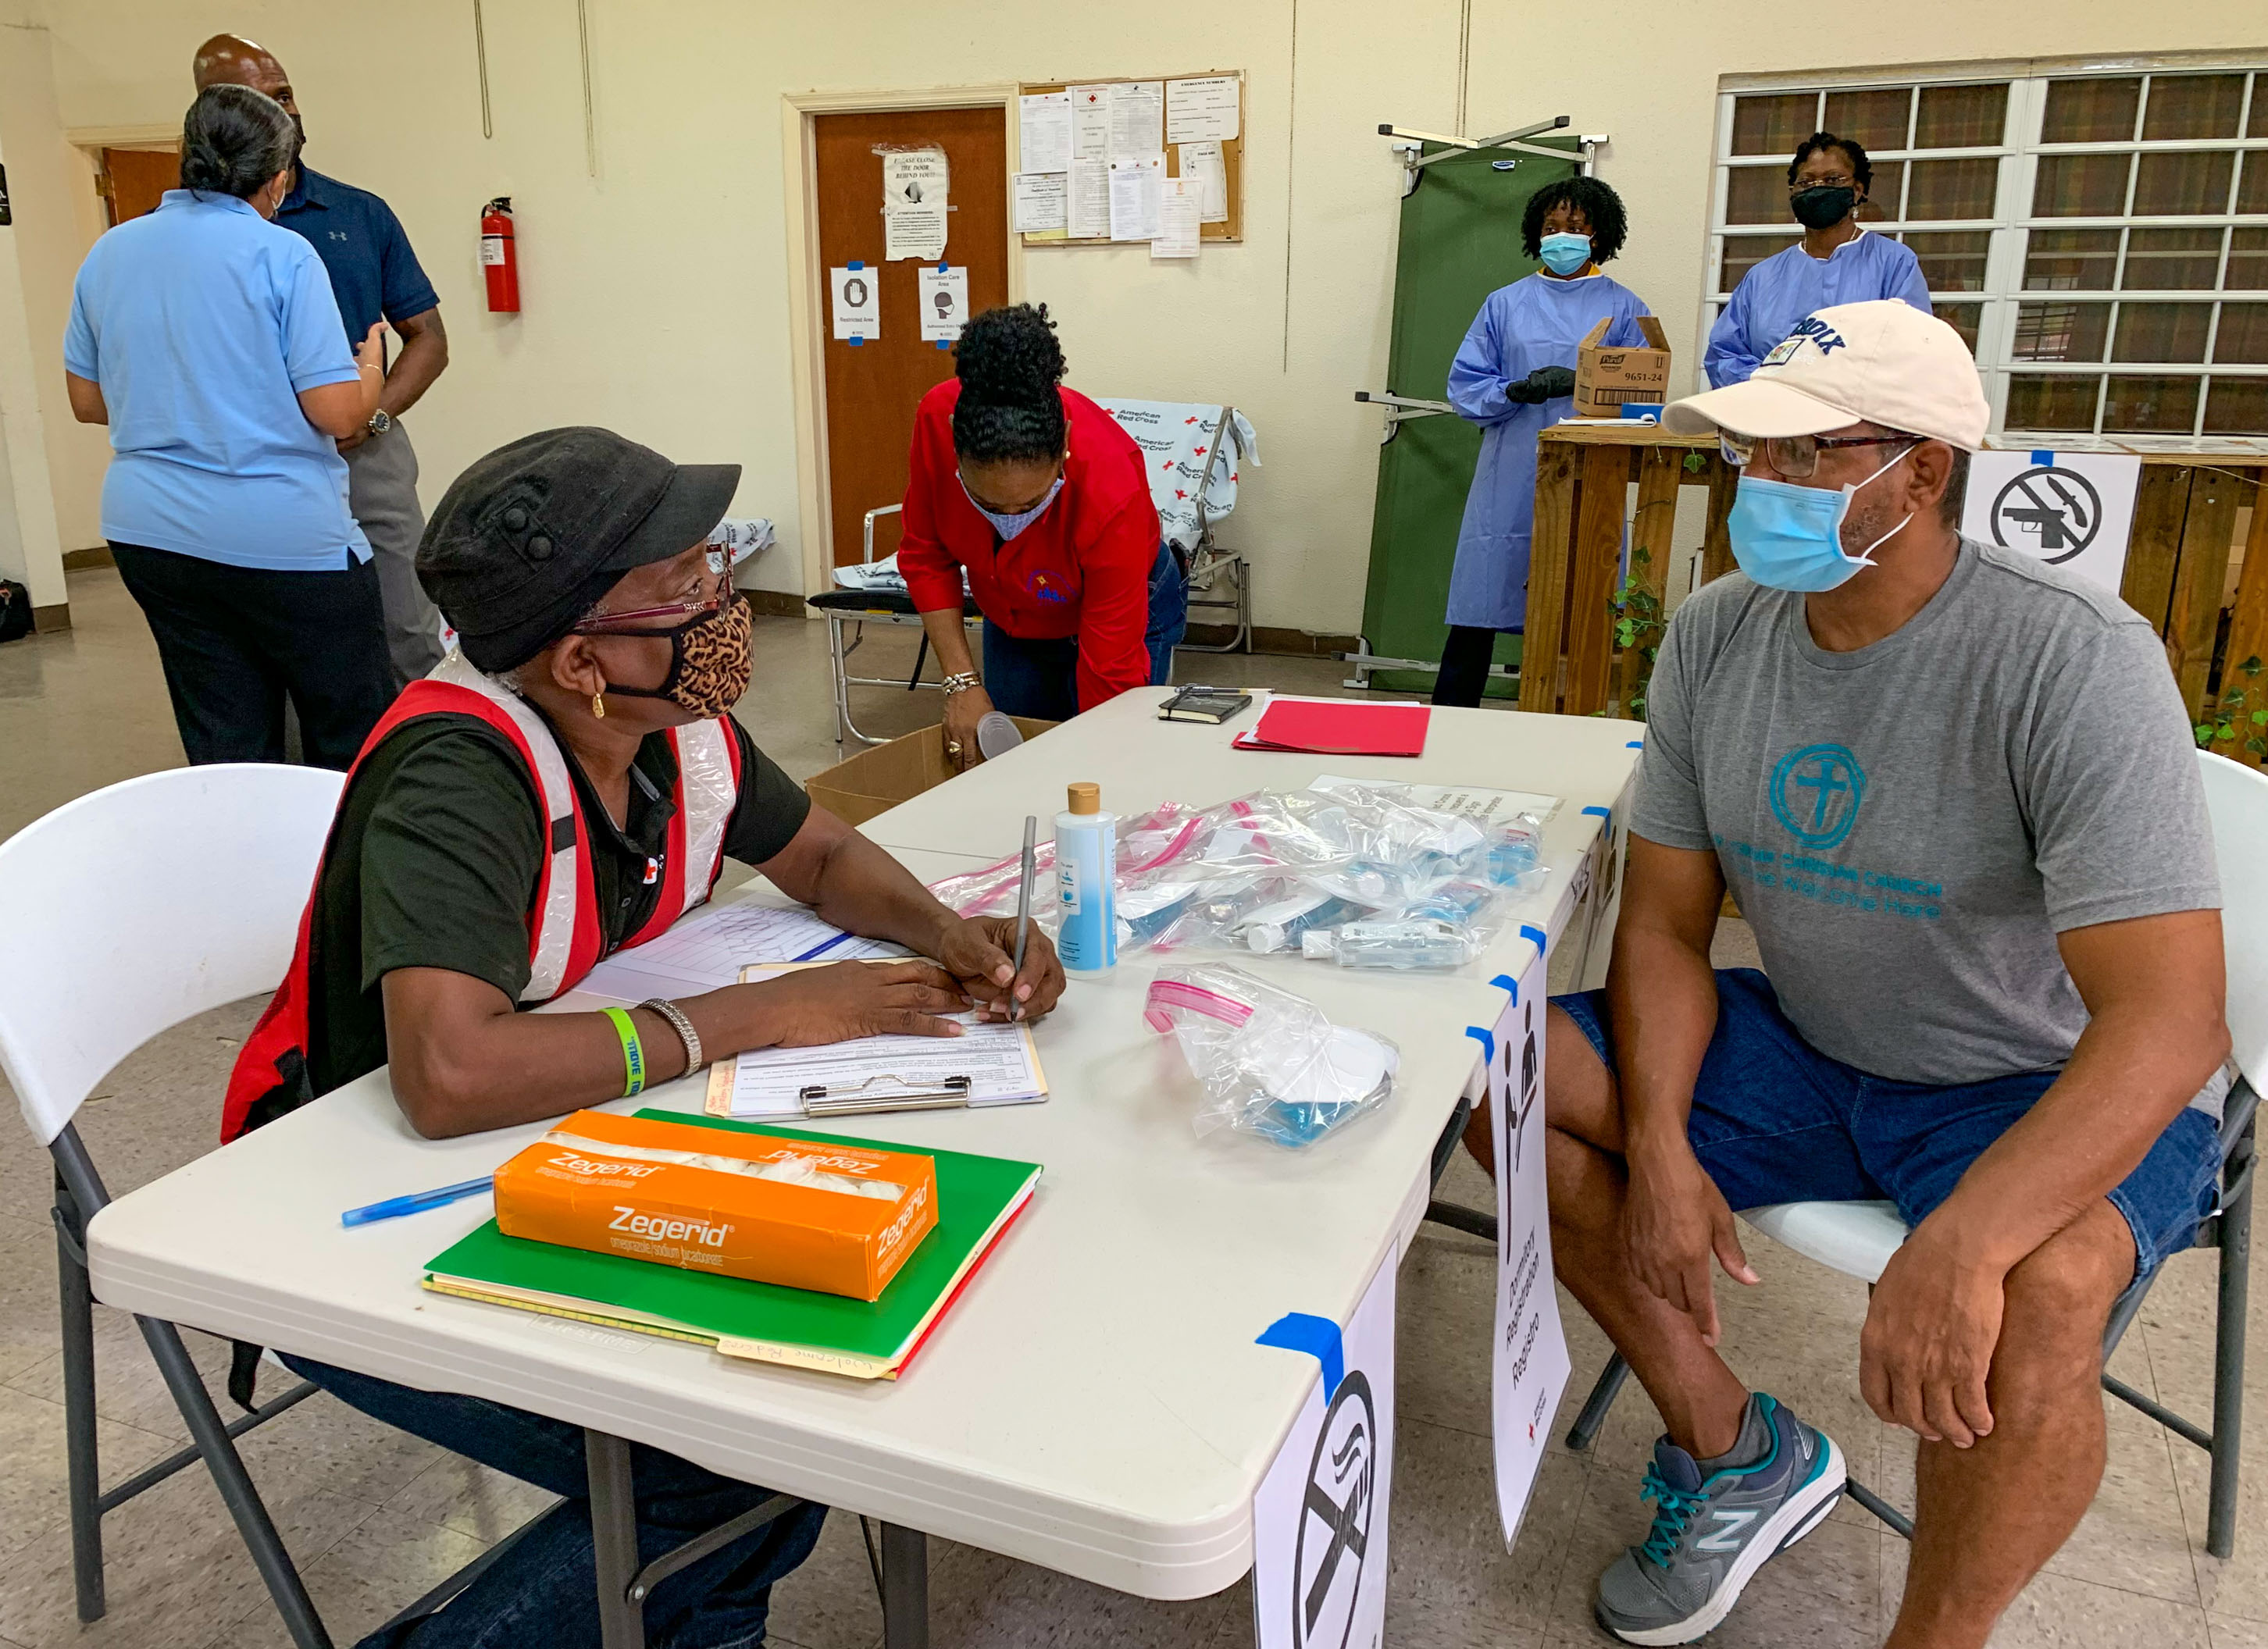 A volunteer role playing an evacuee looks to register at the D.C. Canegata Recreation Center shelter during an evacuation shelter drill. Members of the Voluntary Organizations Active in Disaster role played evacuees during the field exercise.